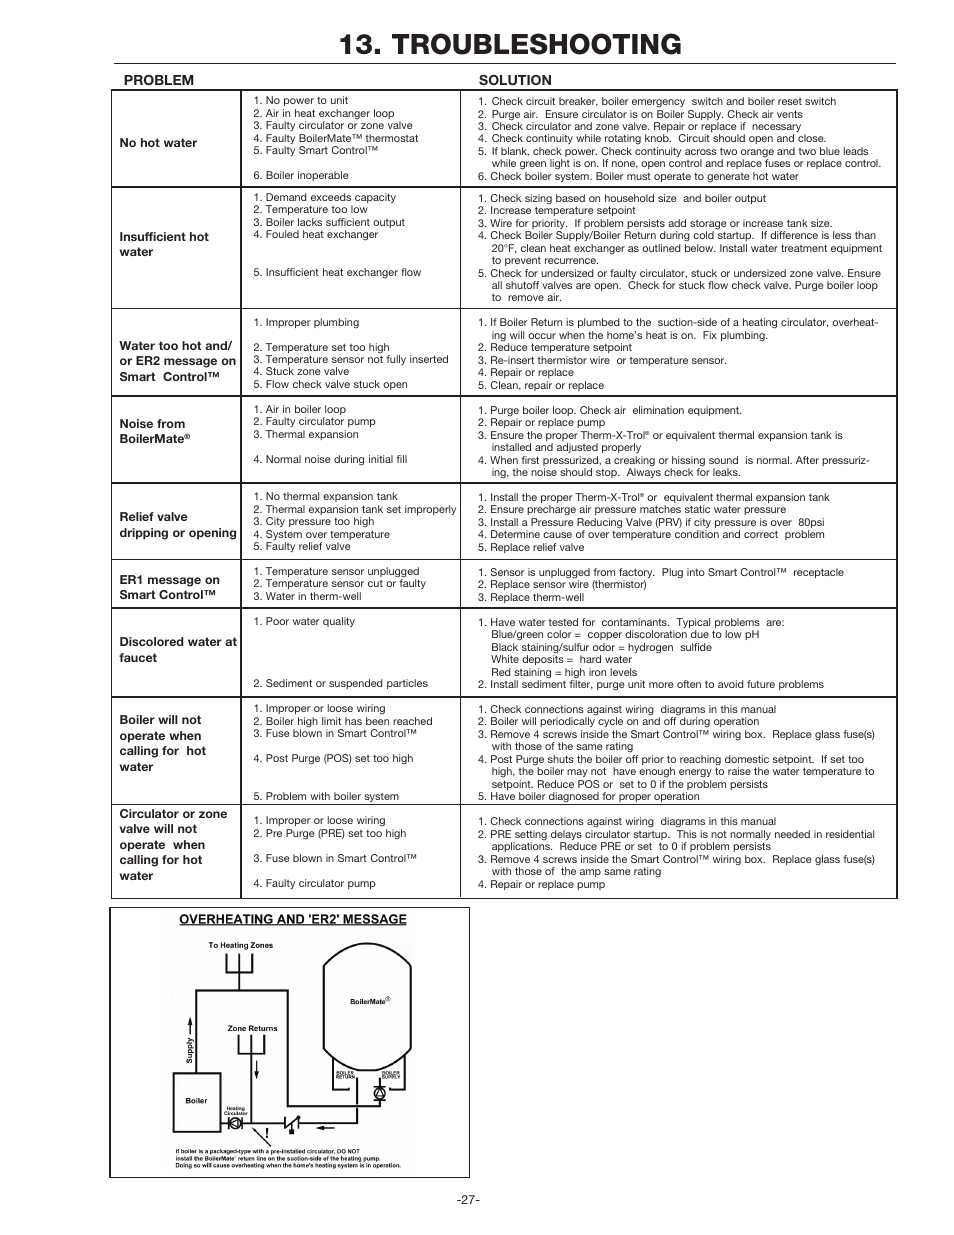 Troubleshooting, Problem, Solution | Amtrol BoilerMate Top Down User Manual  | Page 27 / 32 Wiring-Diagram Legend Manuals Directory